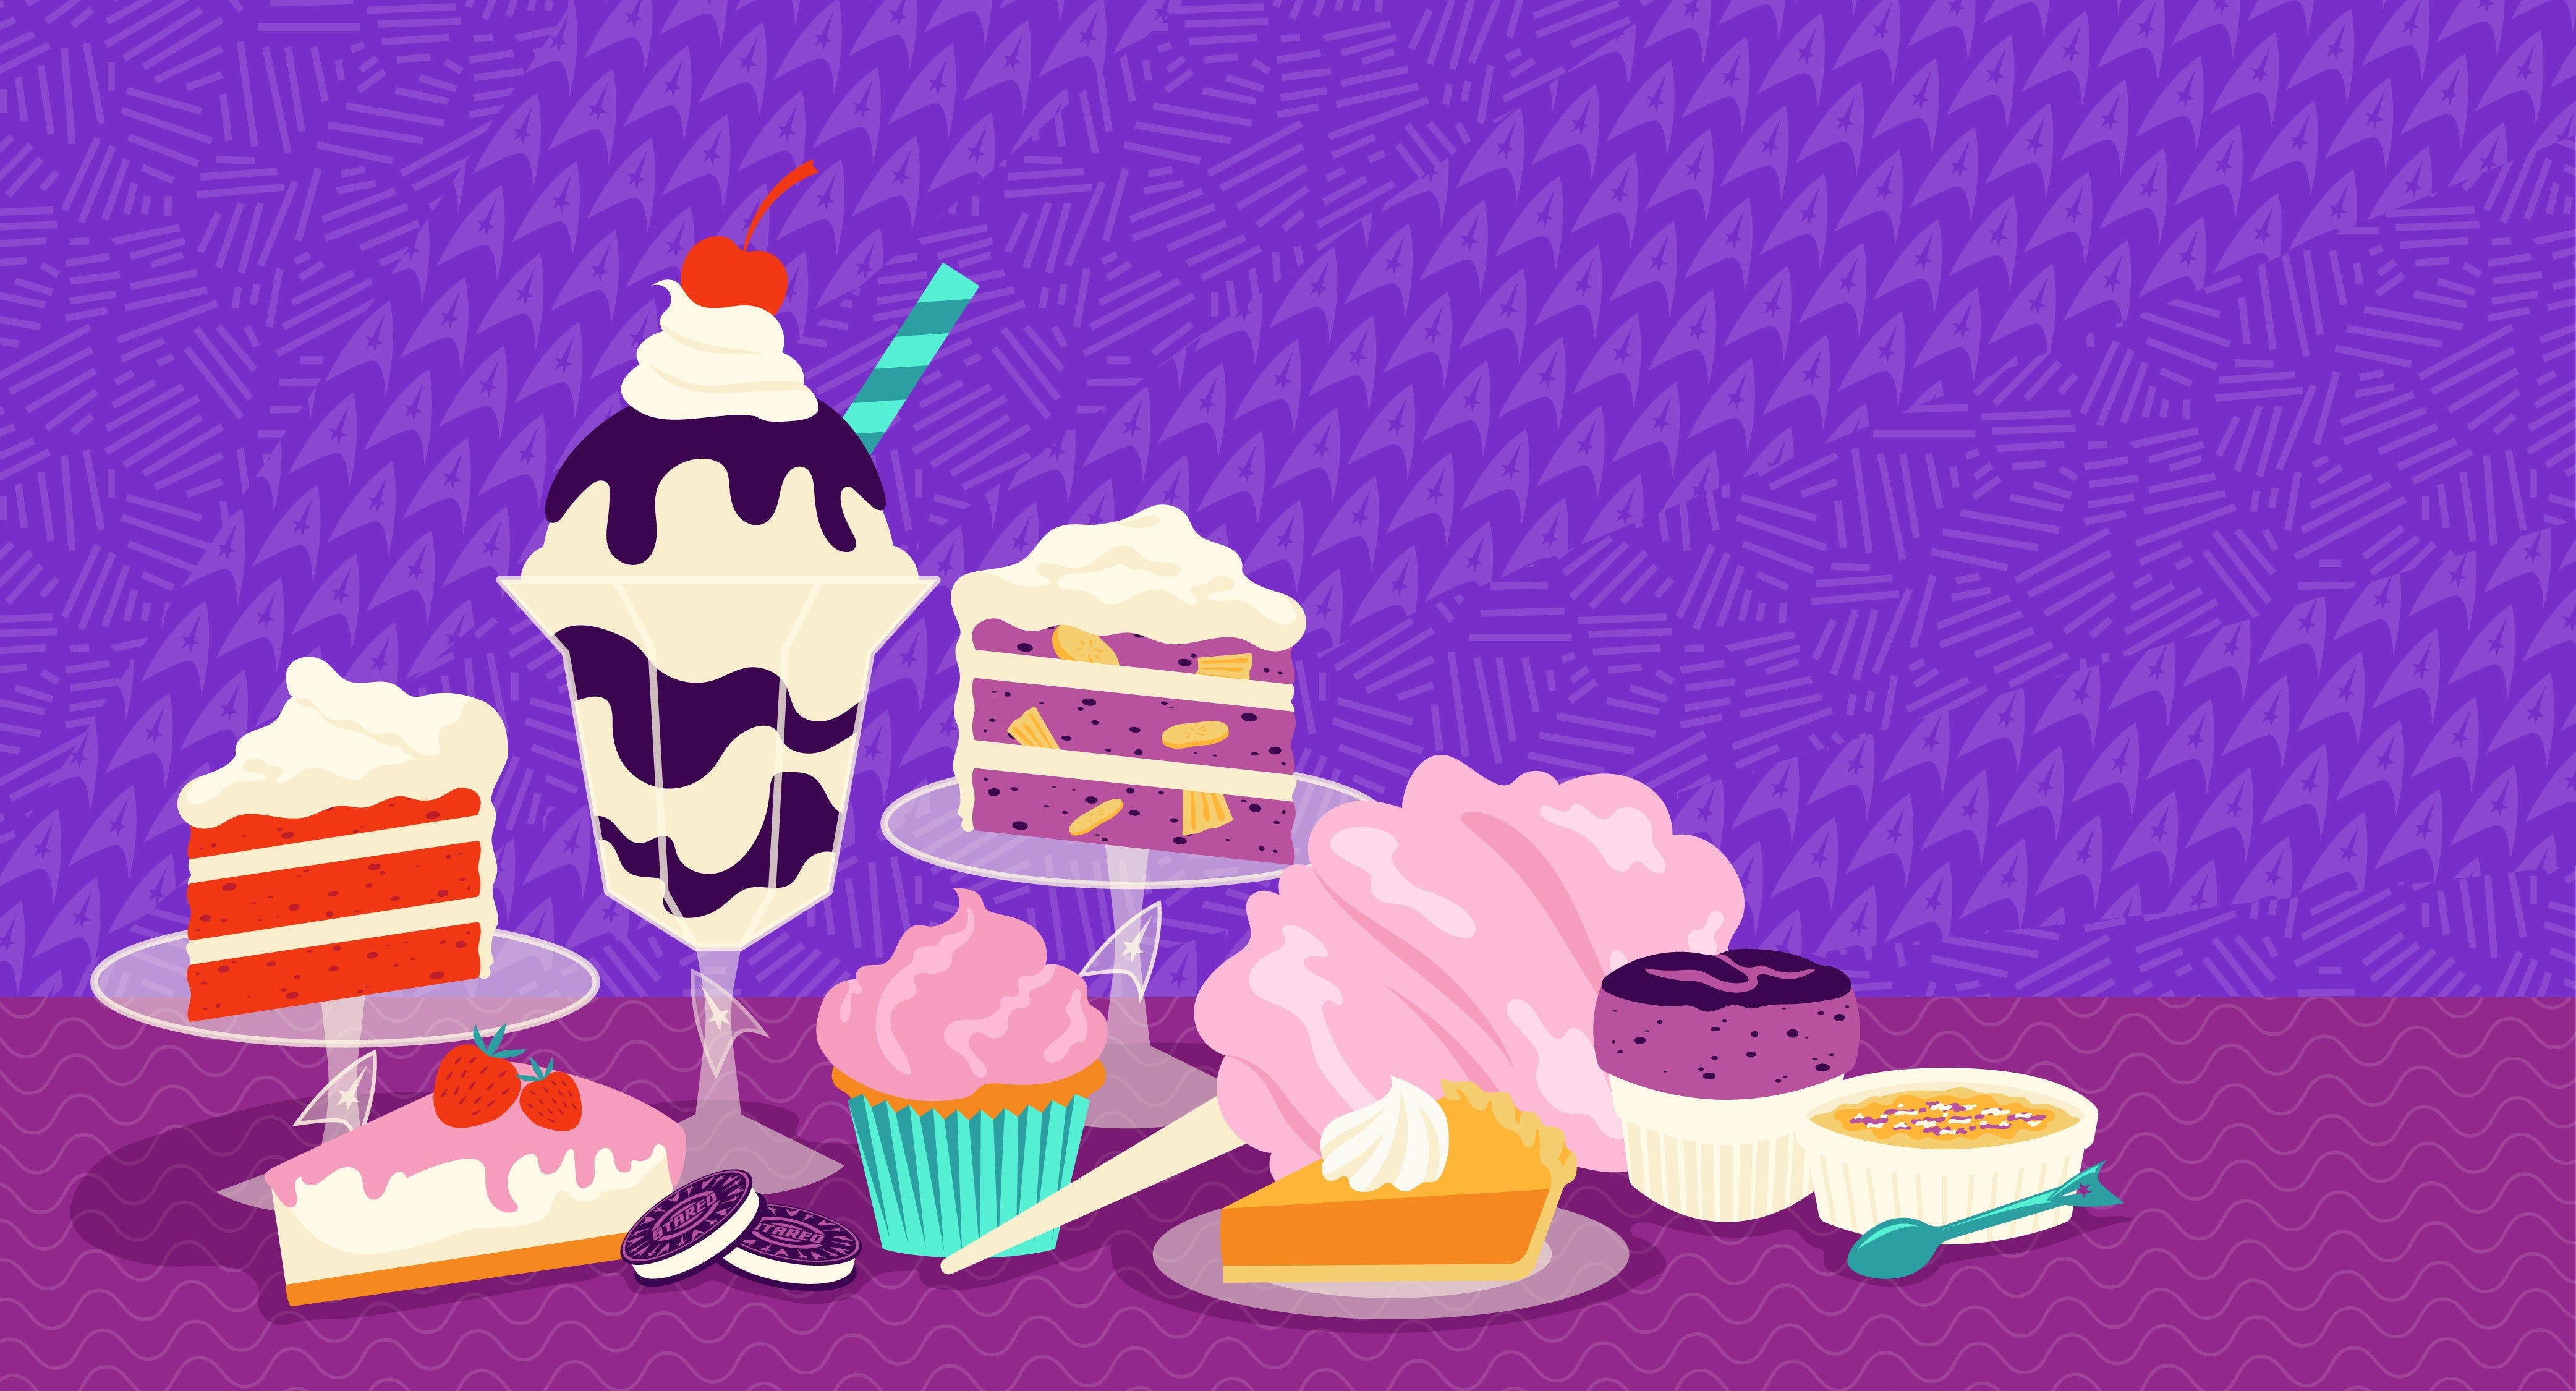 Illustrated images of desserts - including a sundae, pie, and cake - sit on a table against a purple background.